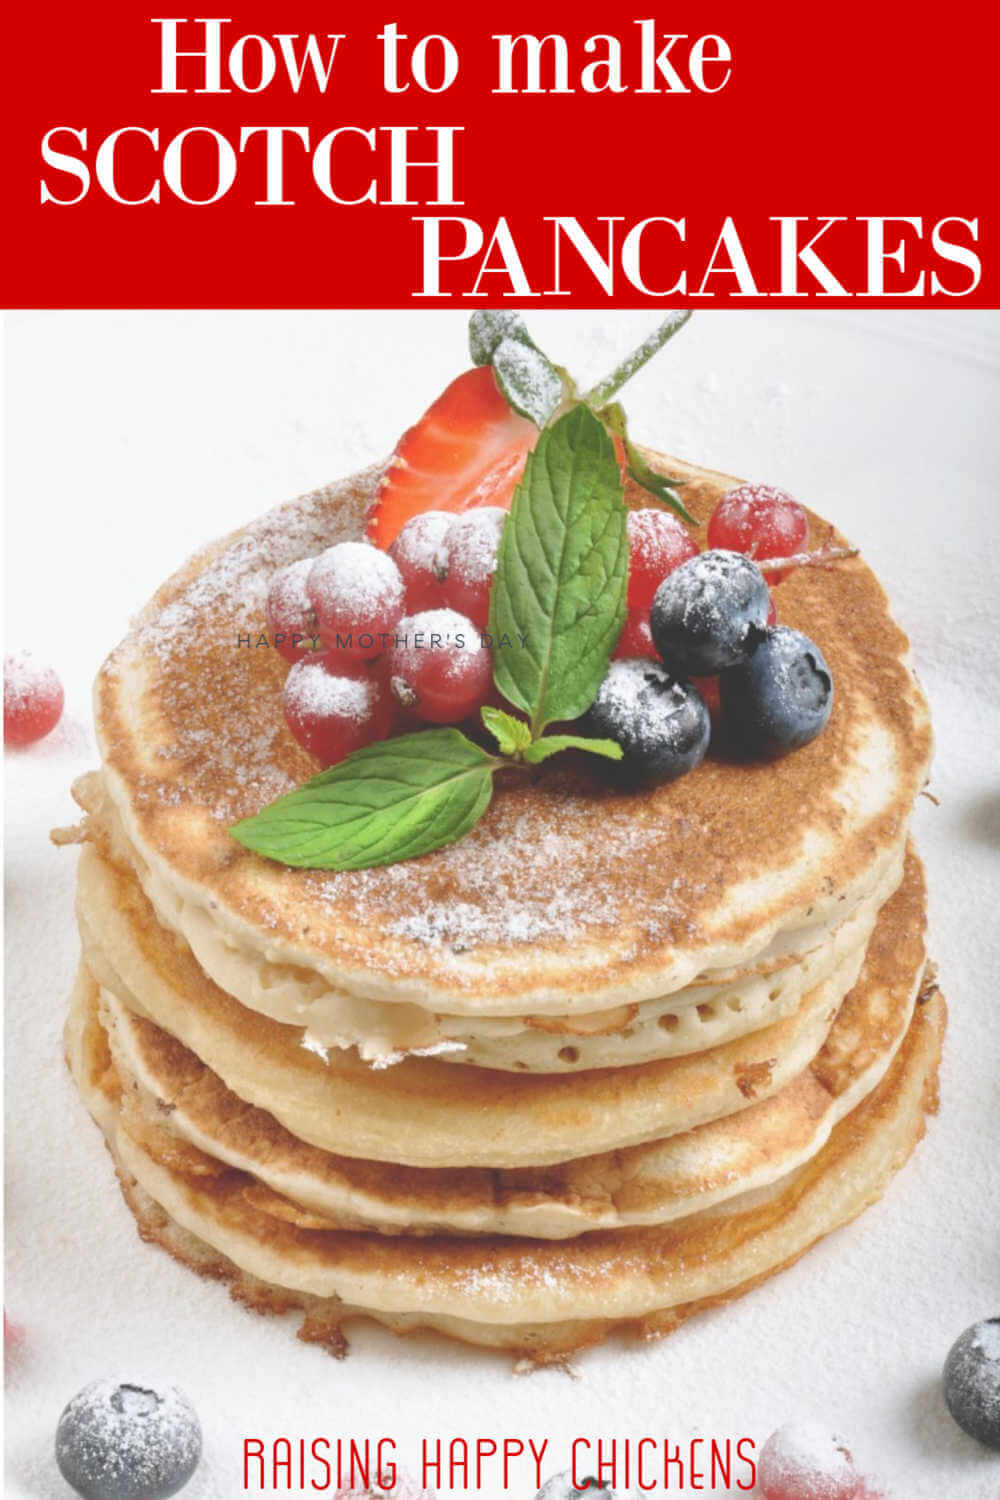 Scotch pancakes: an authentic, inexpensive, delicious recipe.